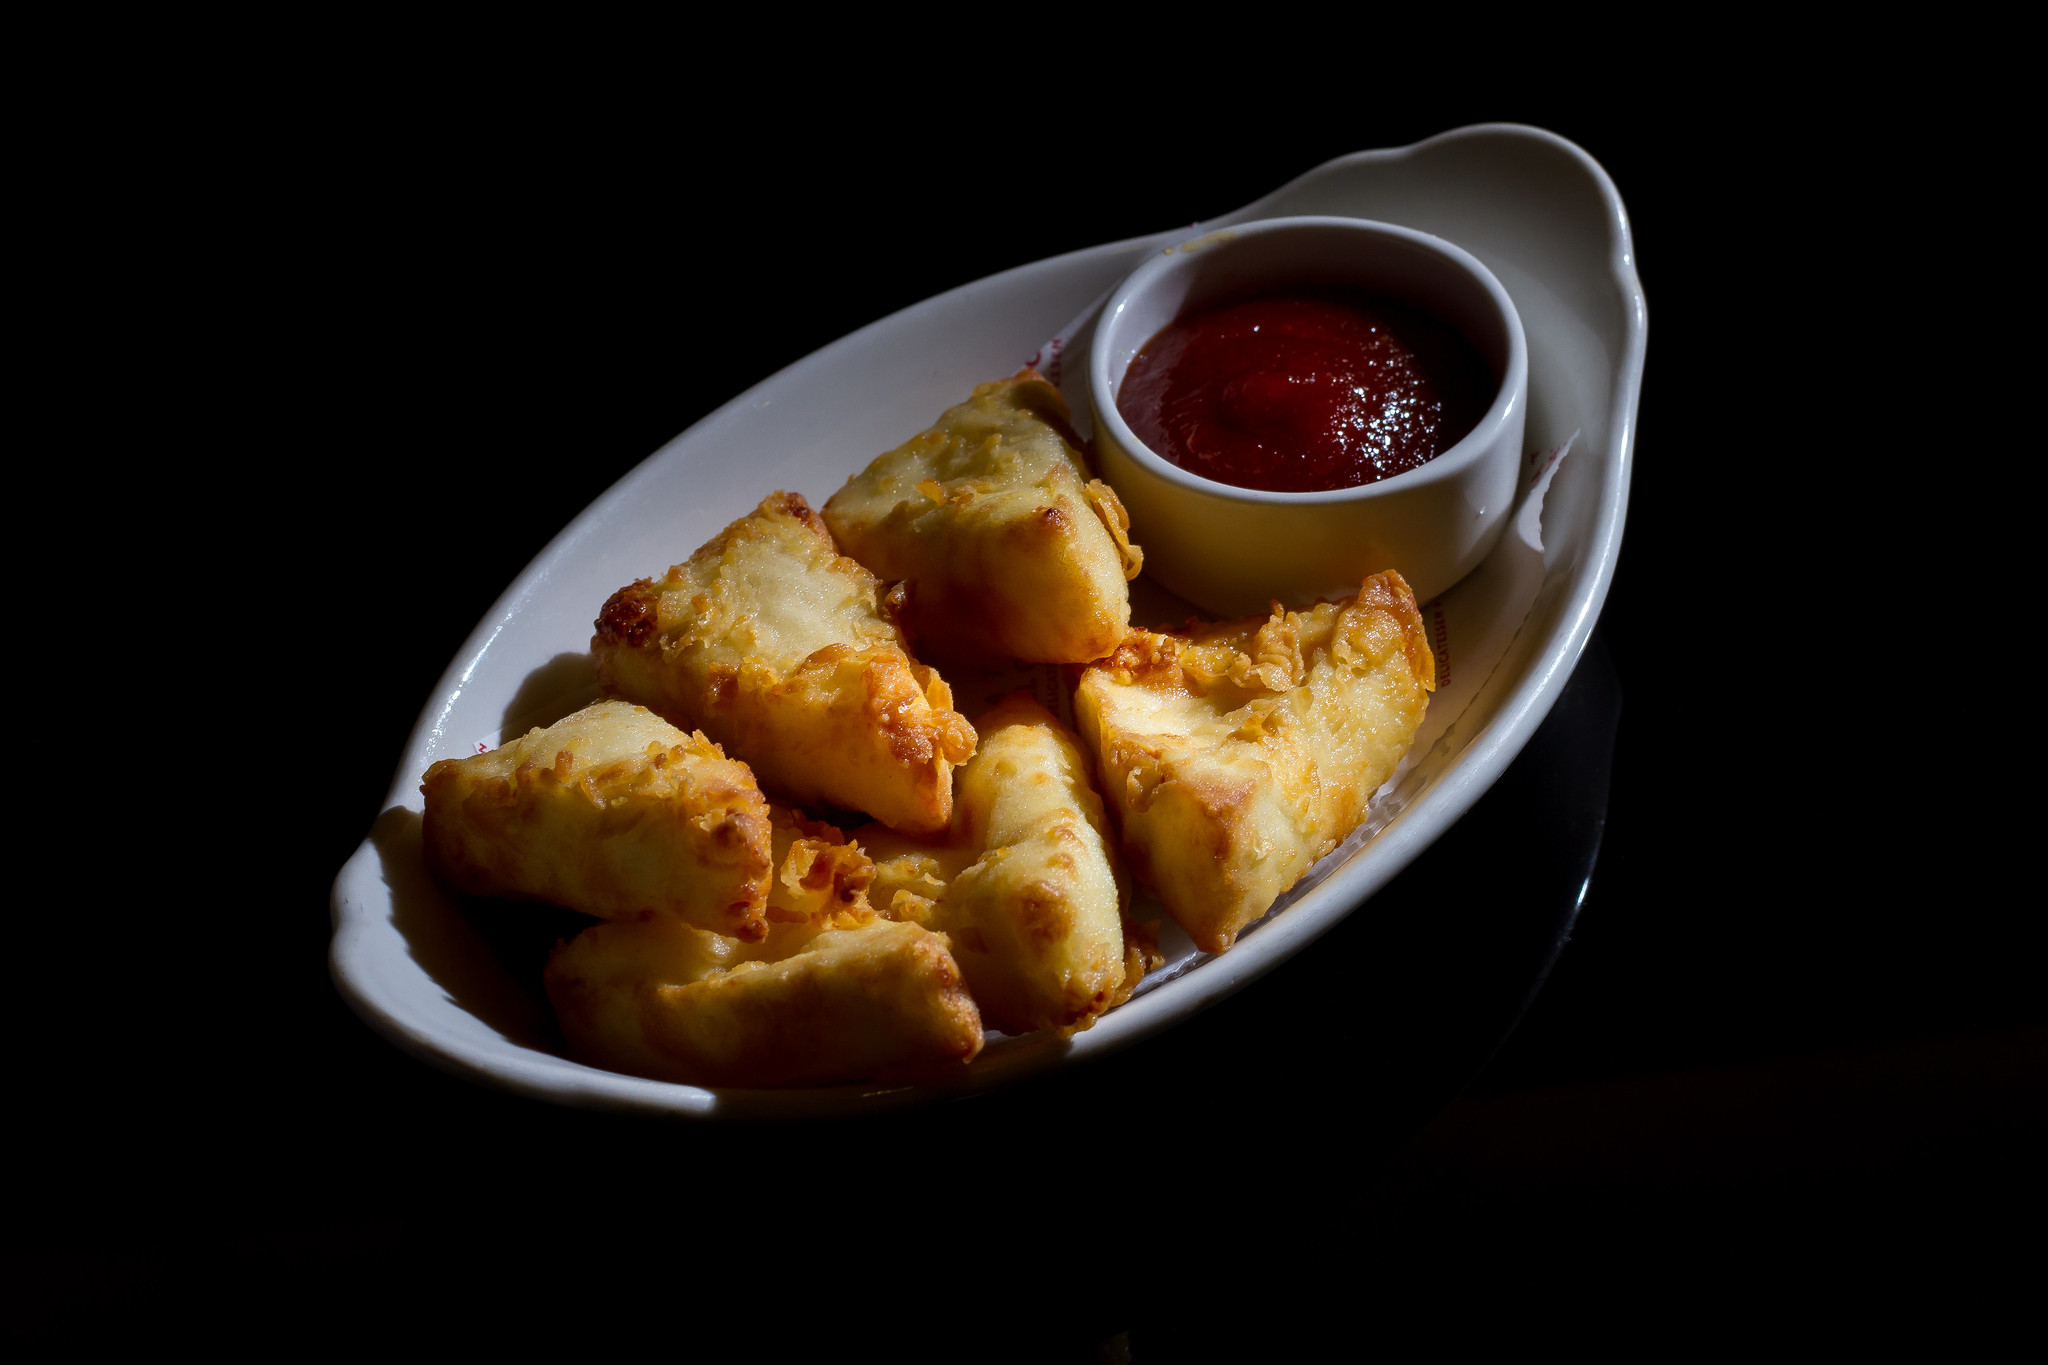 Fried cheese with tomato jam